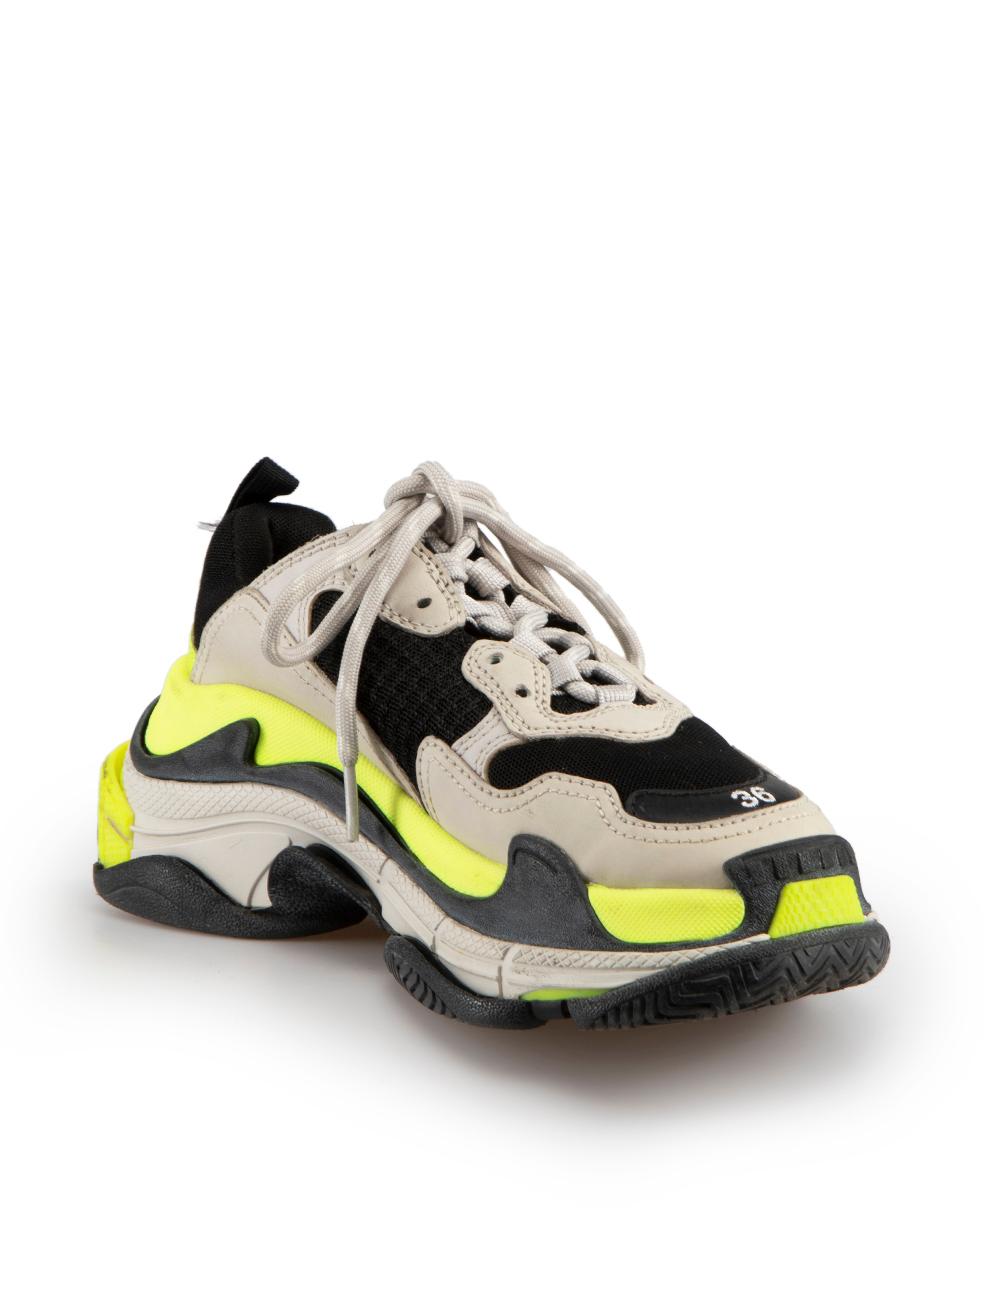 CONDITION is Very good. Minimal wear to trainers is evident. Minimal discoloured marks to outer soles on this used Balenciaga designer resale item.
  
Details
Triple S
Multicolour
Trainers
Leather and cloth textile
Chunky sole
Lace up fastening
 